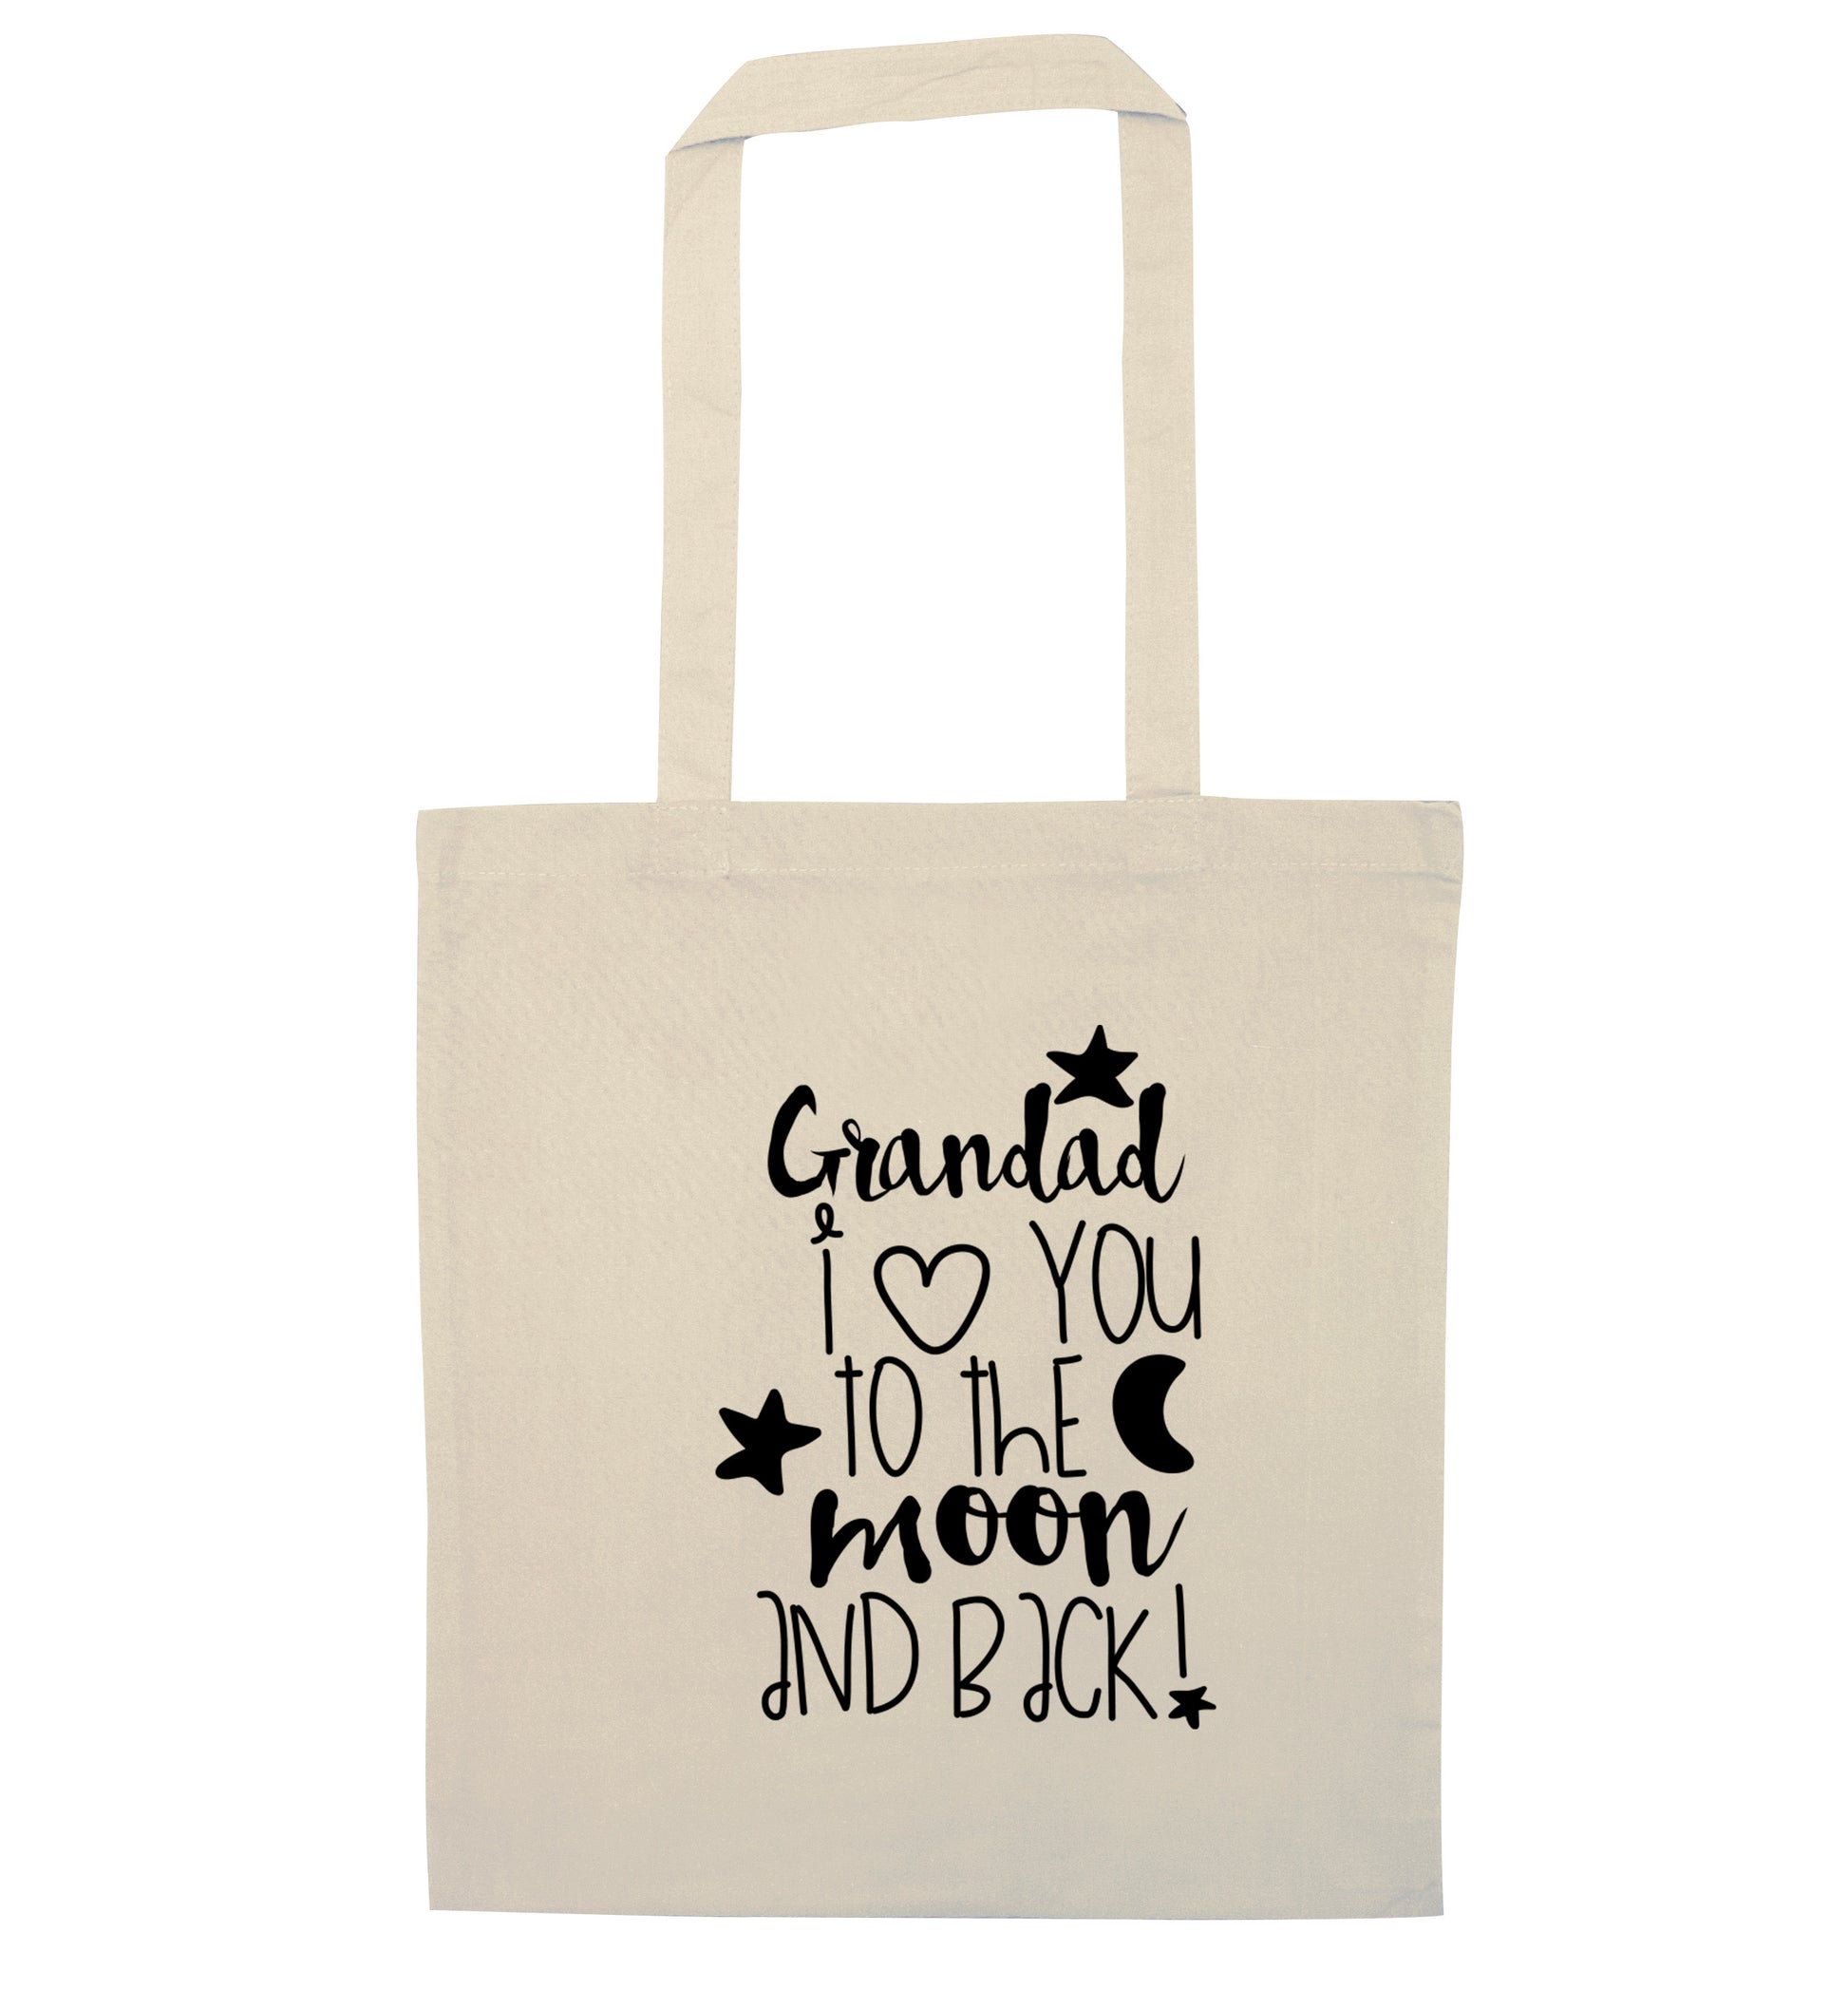 Grandad's I love you to the moon and back natural tote bag